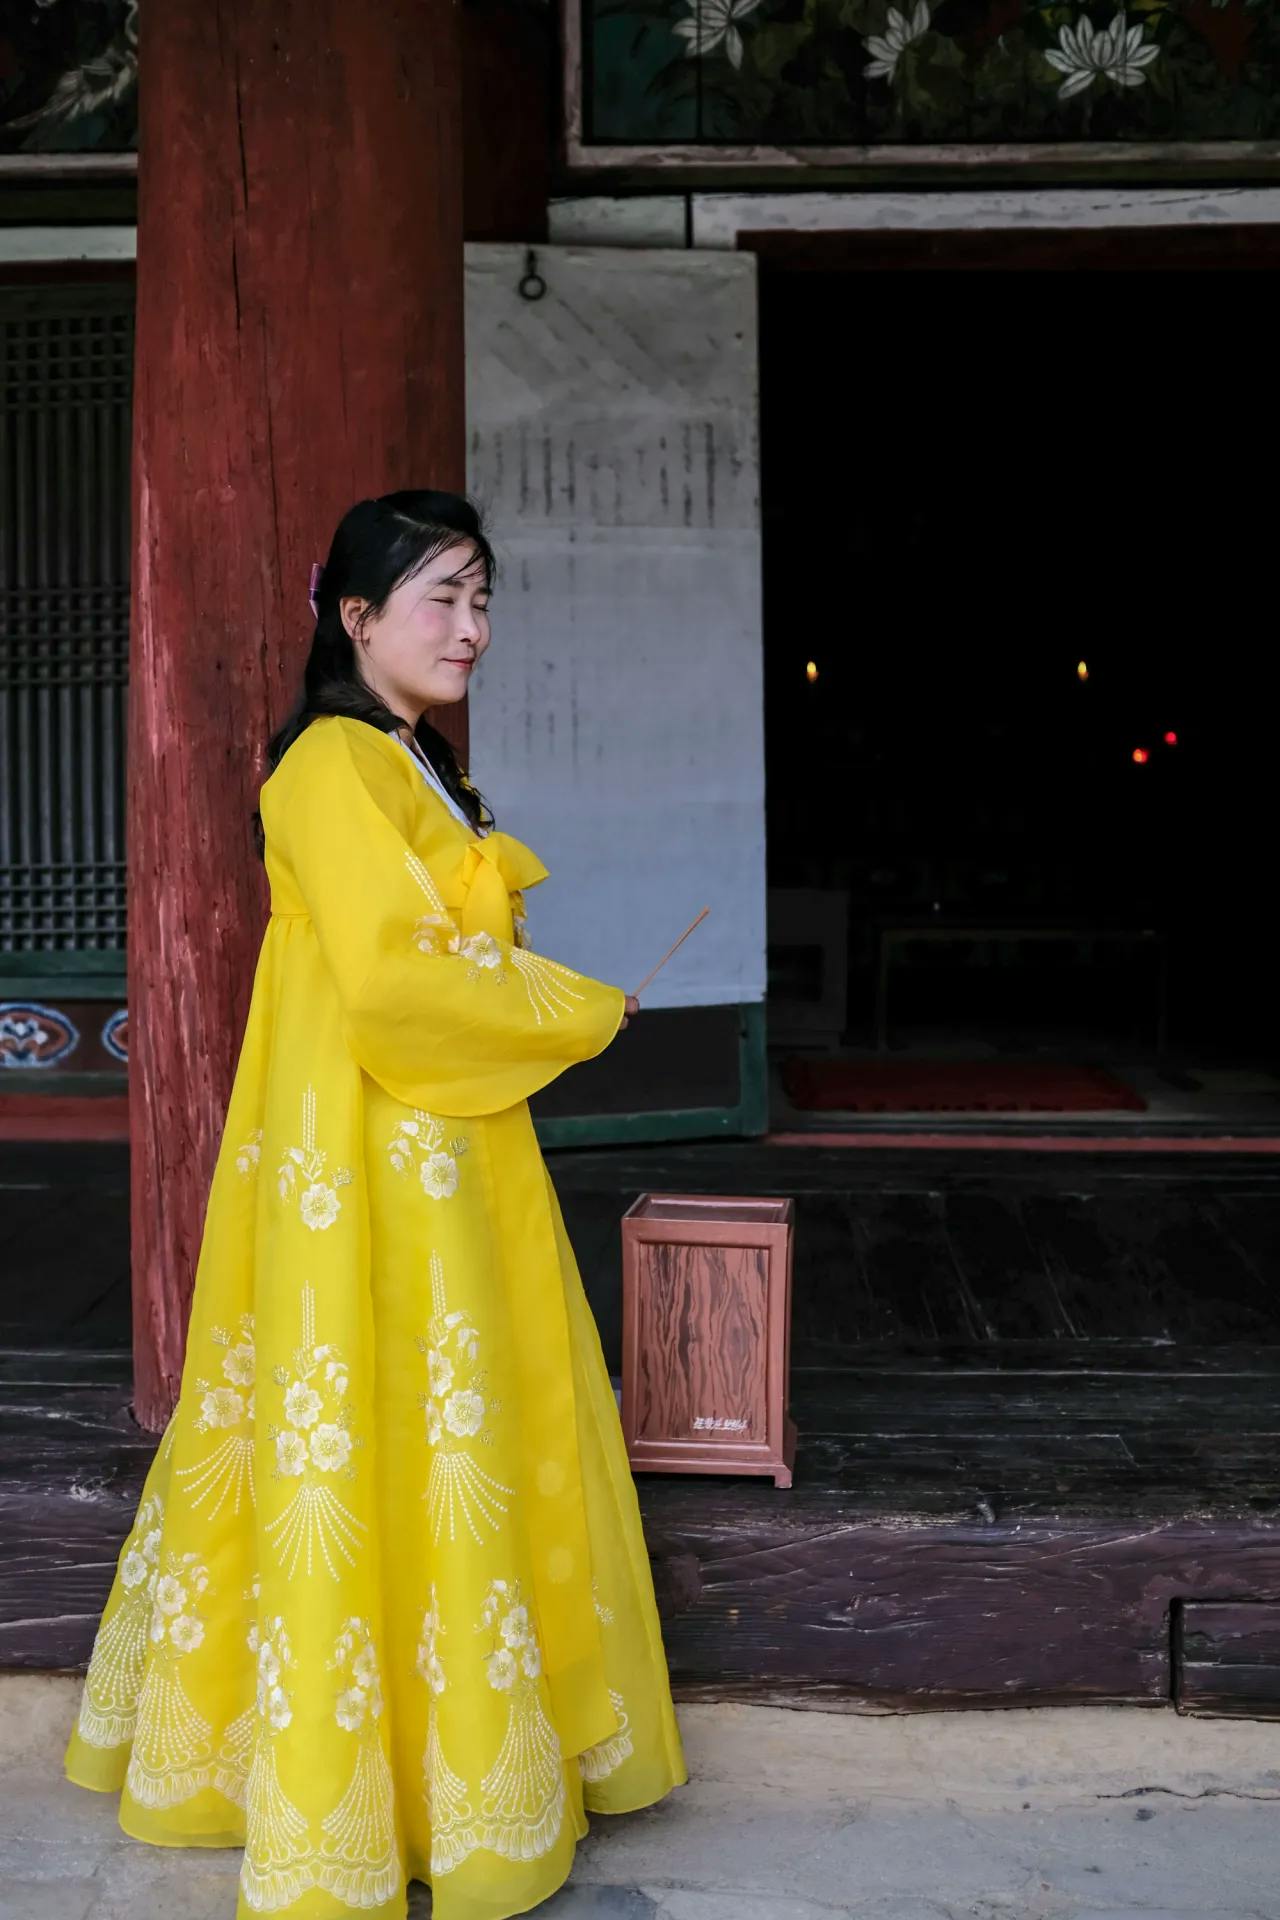 Lady in Hanbok outside a North Korean temple